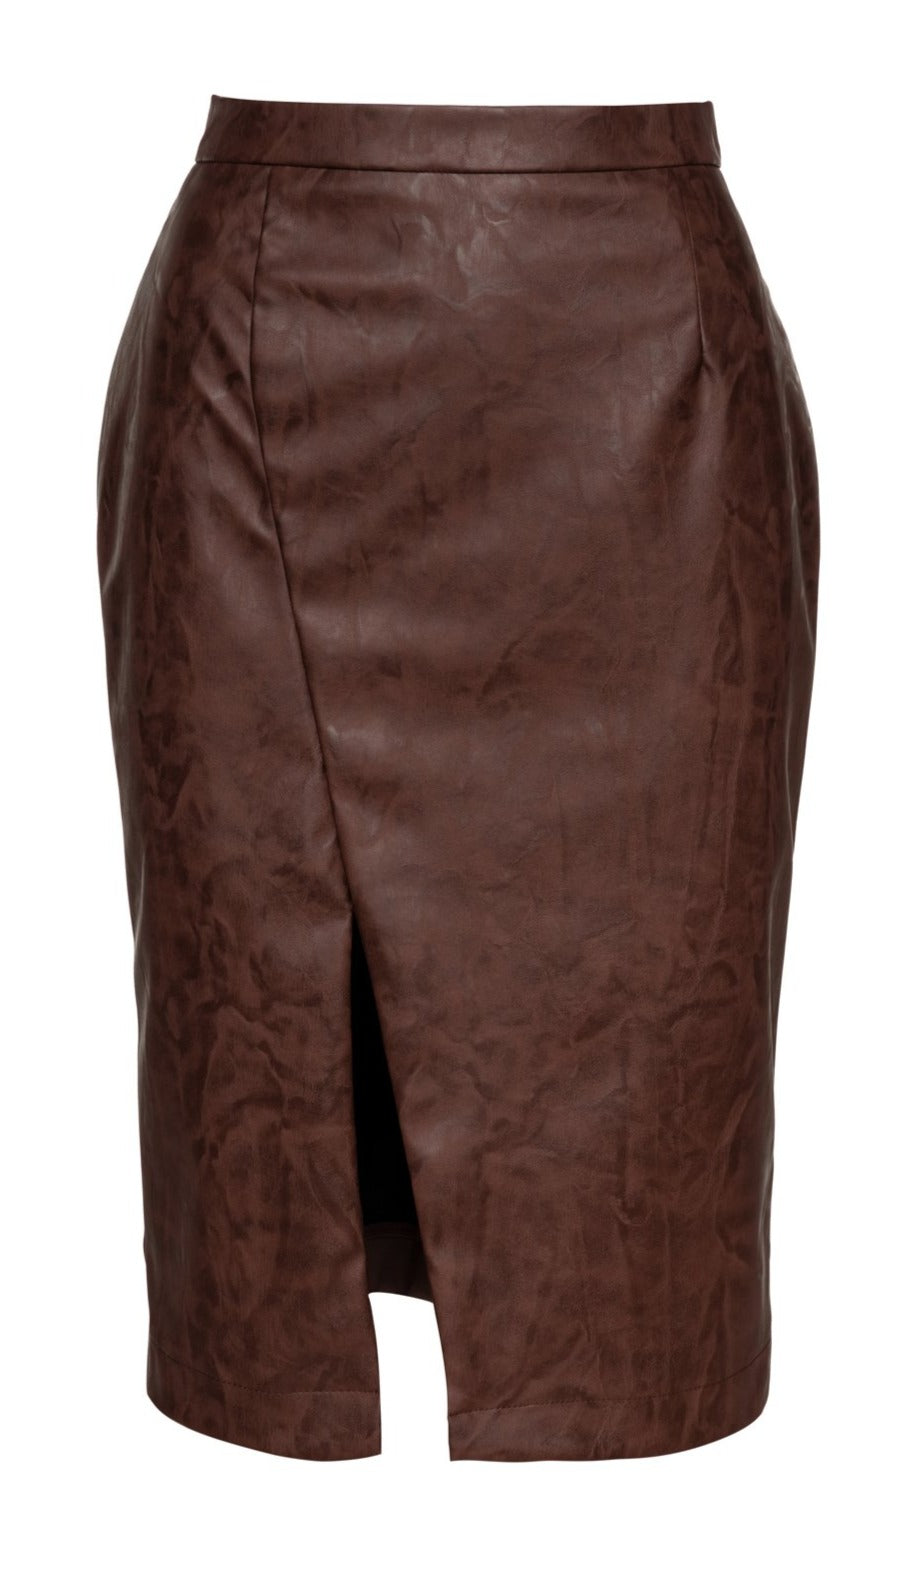 Women’s Chocolate Brown Faux Leather Pencil Skirt Extra Large Conquista